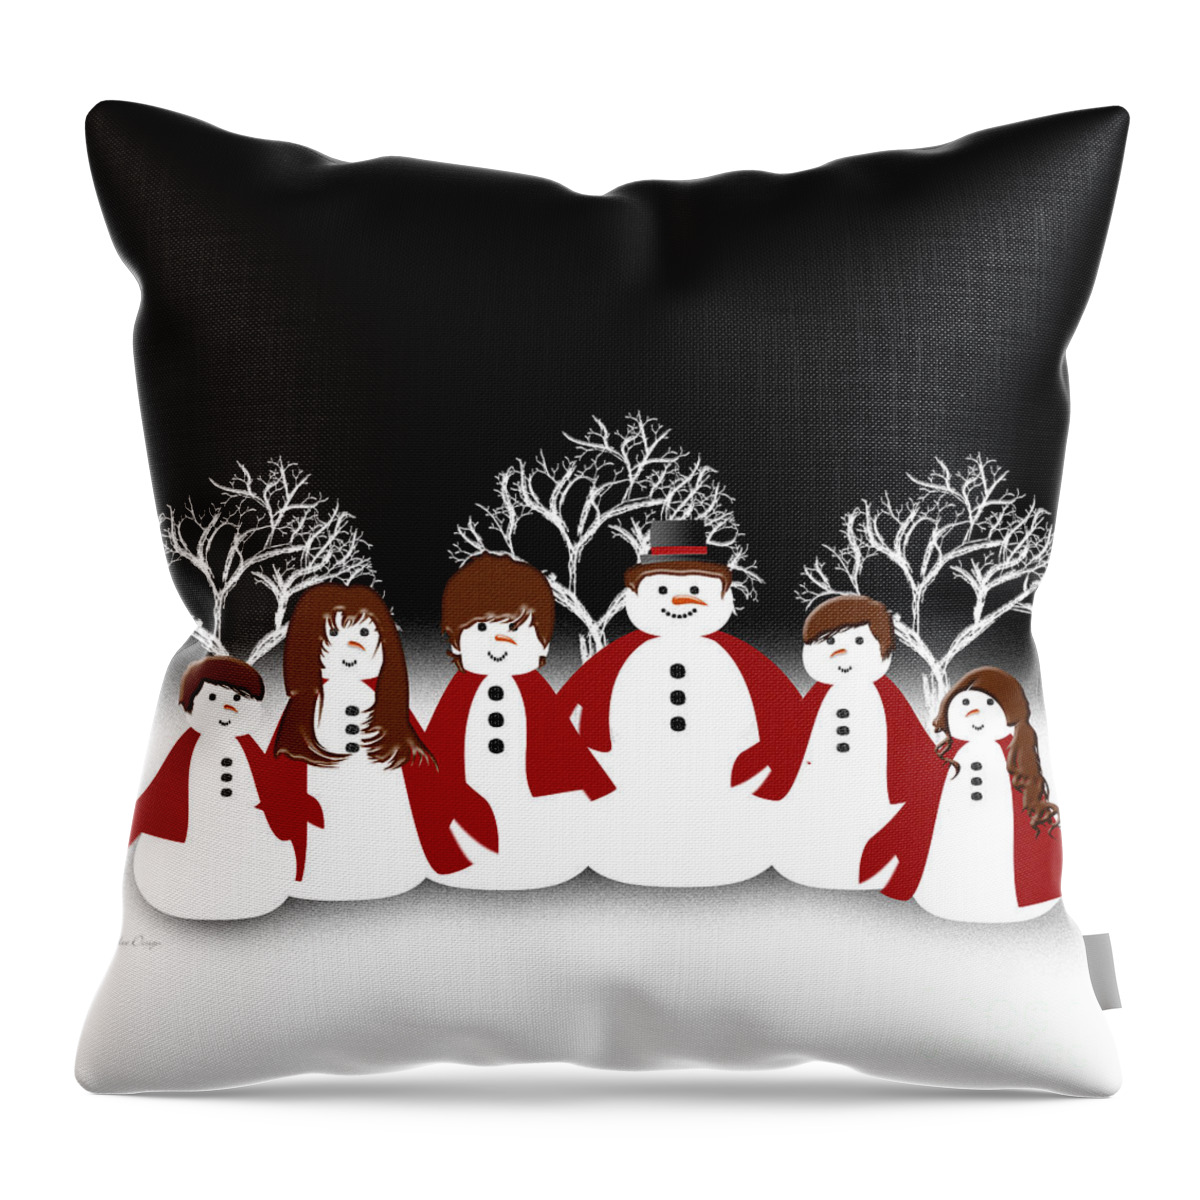 Andee Design Abstract Throw Pillow featuring the digital art Snow Family 2 Square by Andee Design